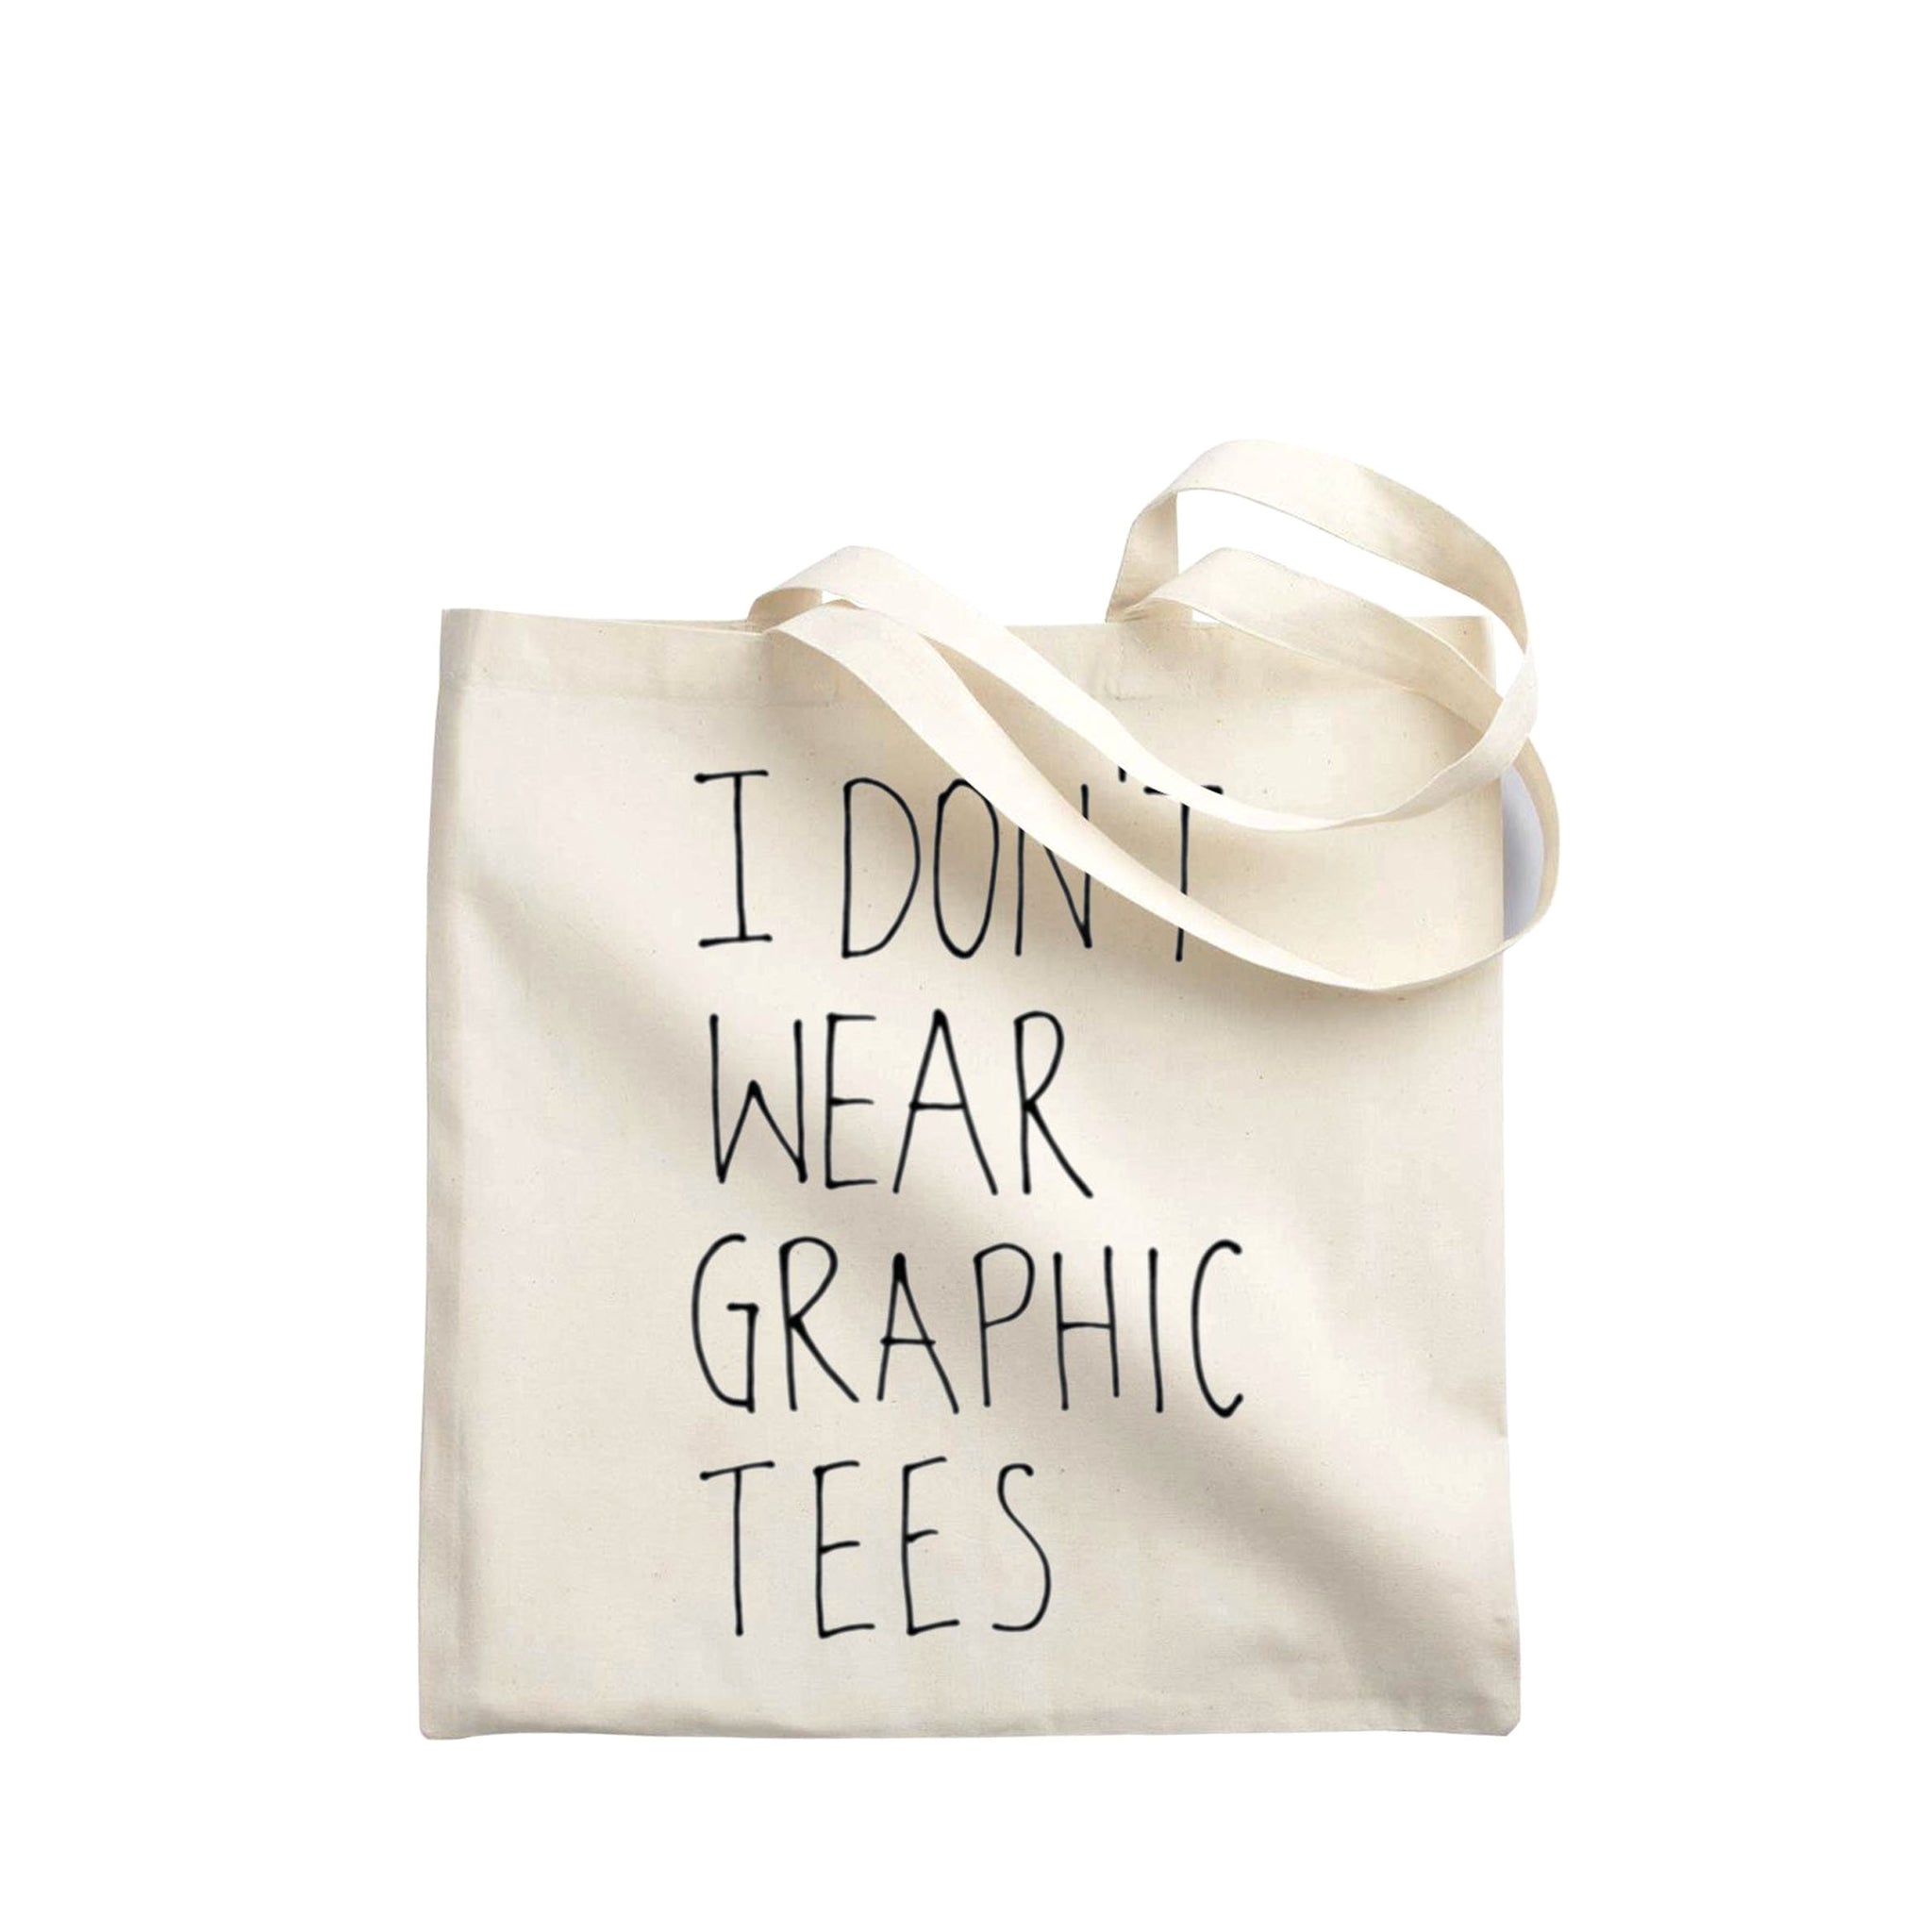 I Don't Wear Graphic Tees. The Tote.